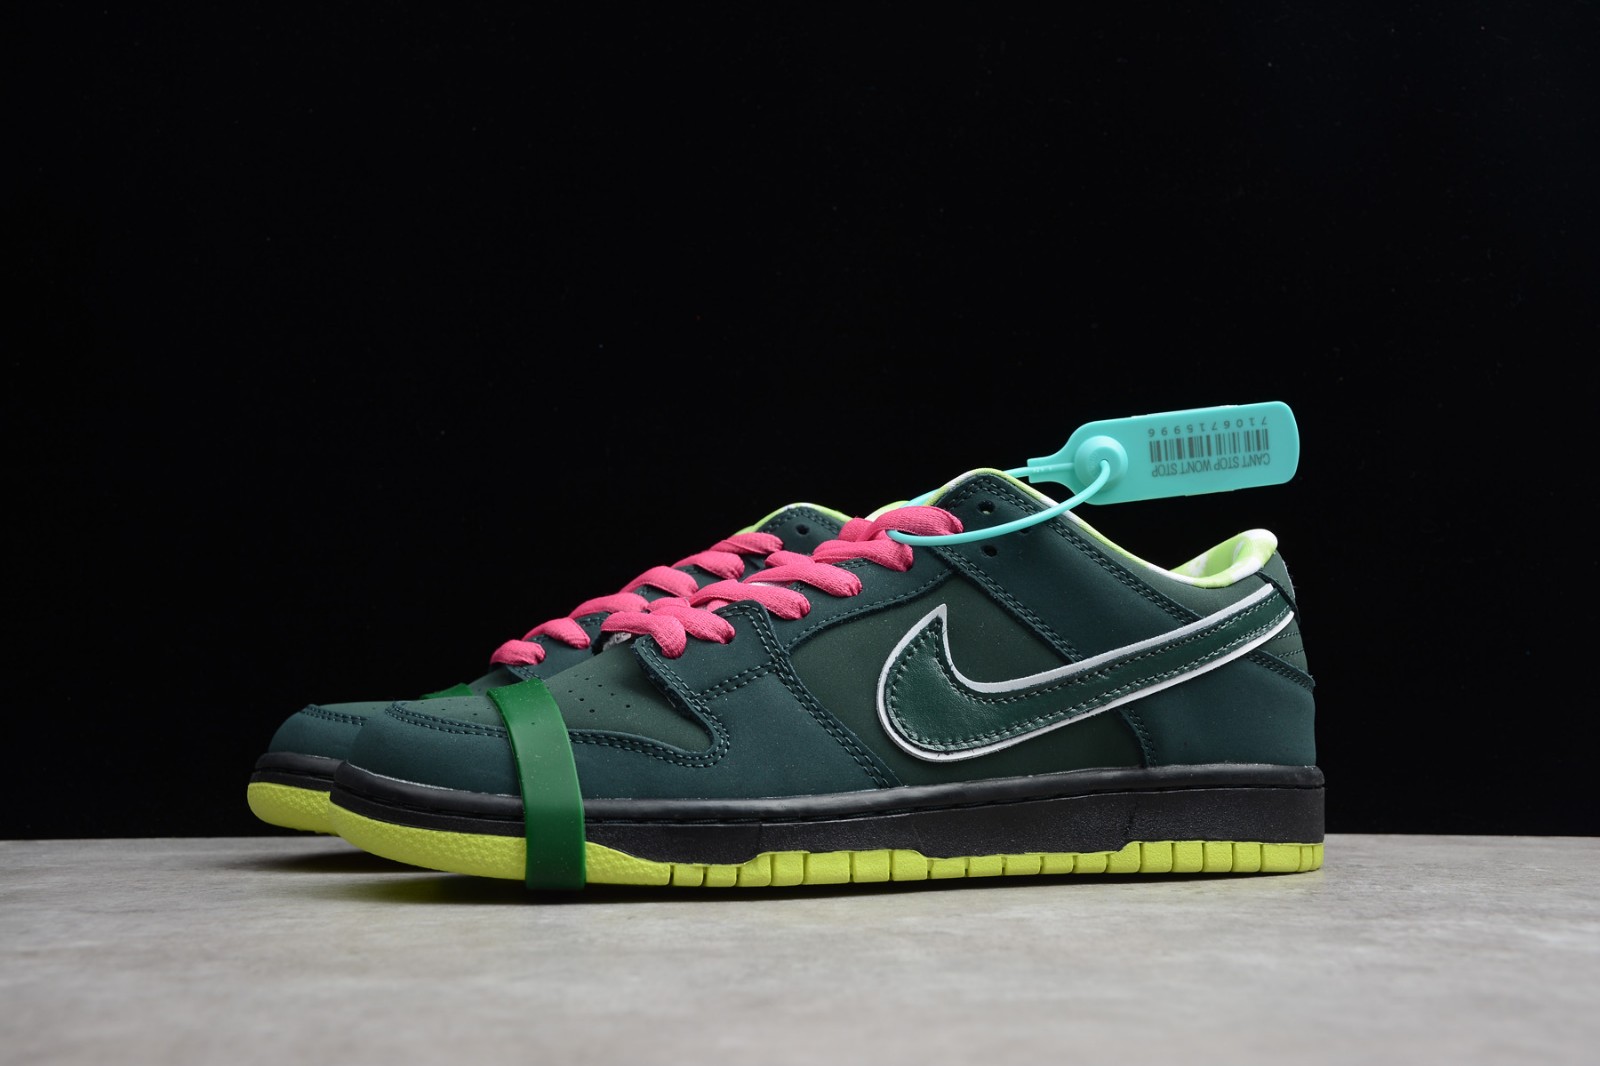 StclaircomoShops - Nike Dunk Low Concepts Green Lobster BV1310 - 337 - cheap nike sneakers for women